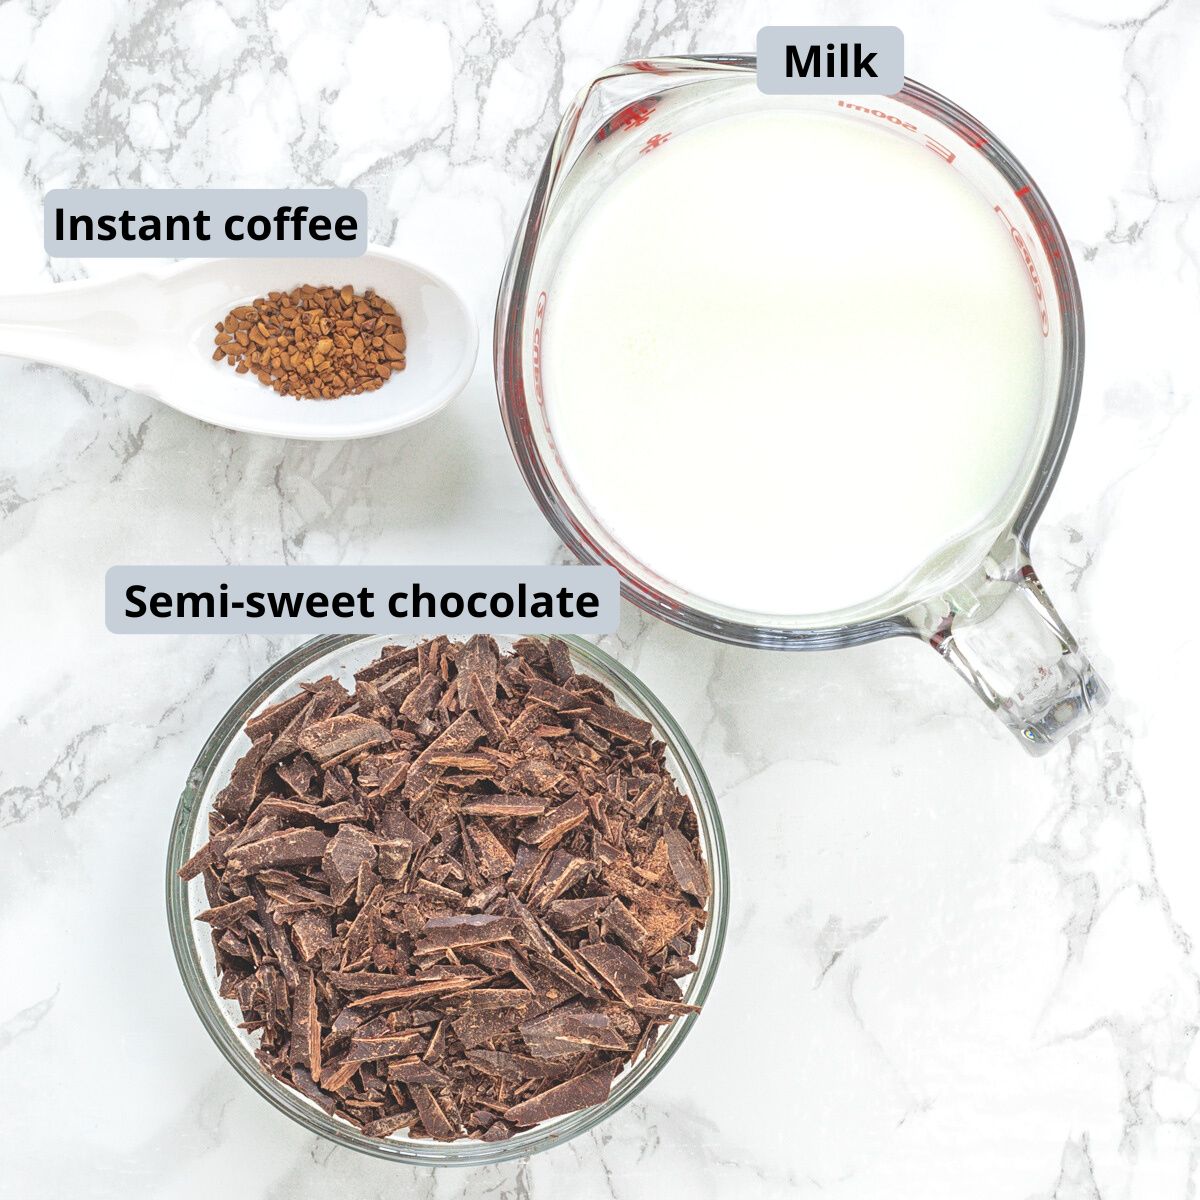 Hot chocolate ingredients with labels.